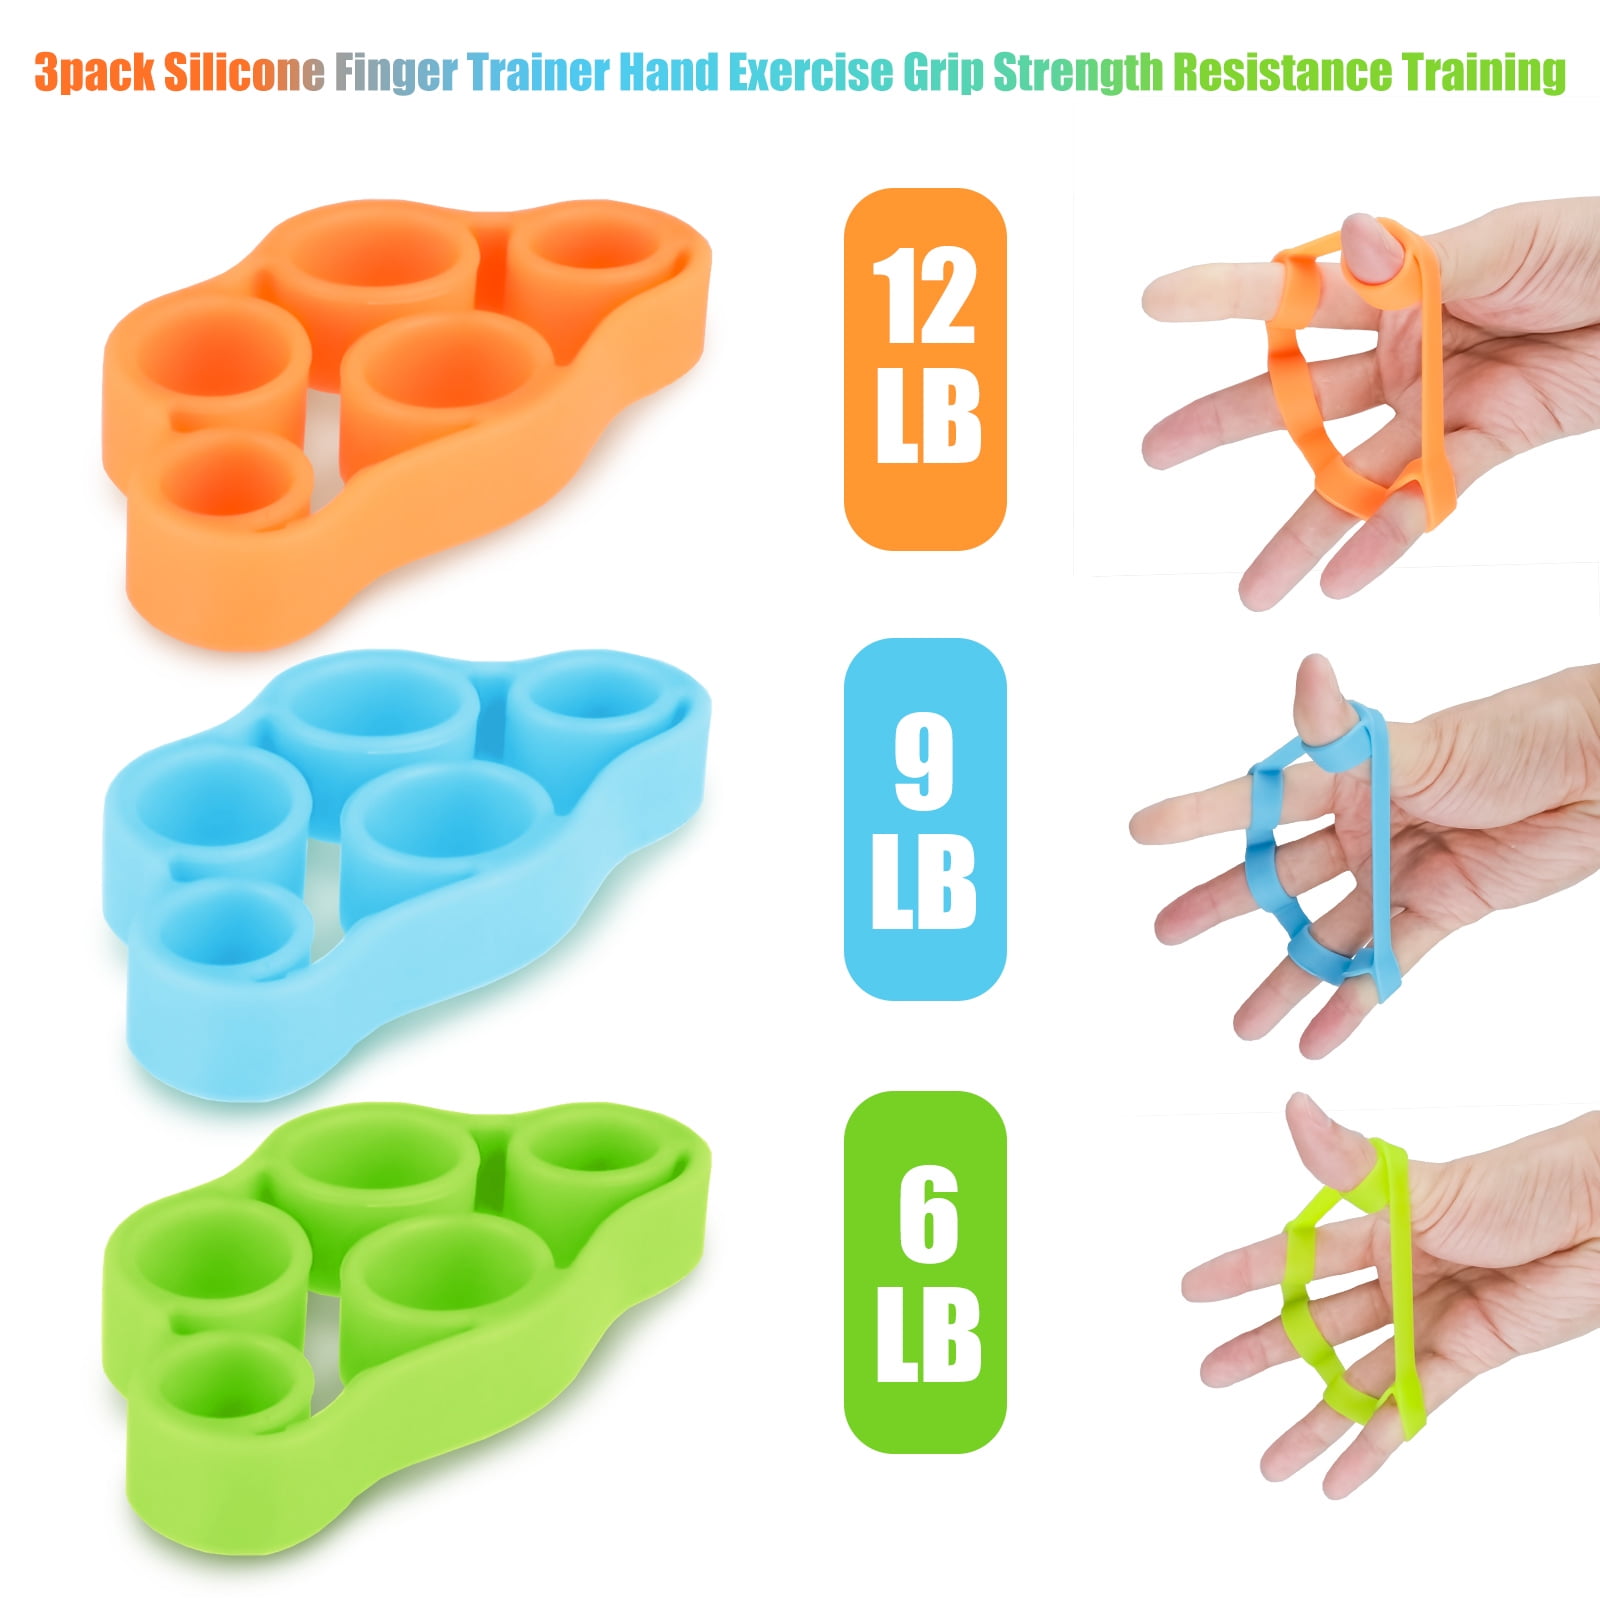 Details about   Finger Stretcher Resistance Forearm Exercise Band Hand Grip Strength Trainer US 